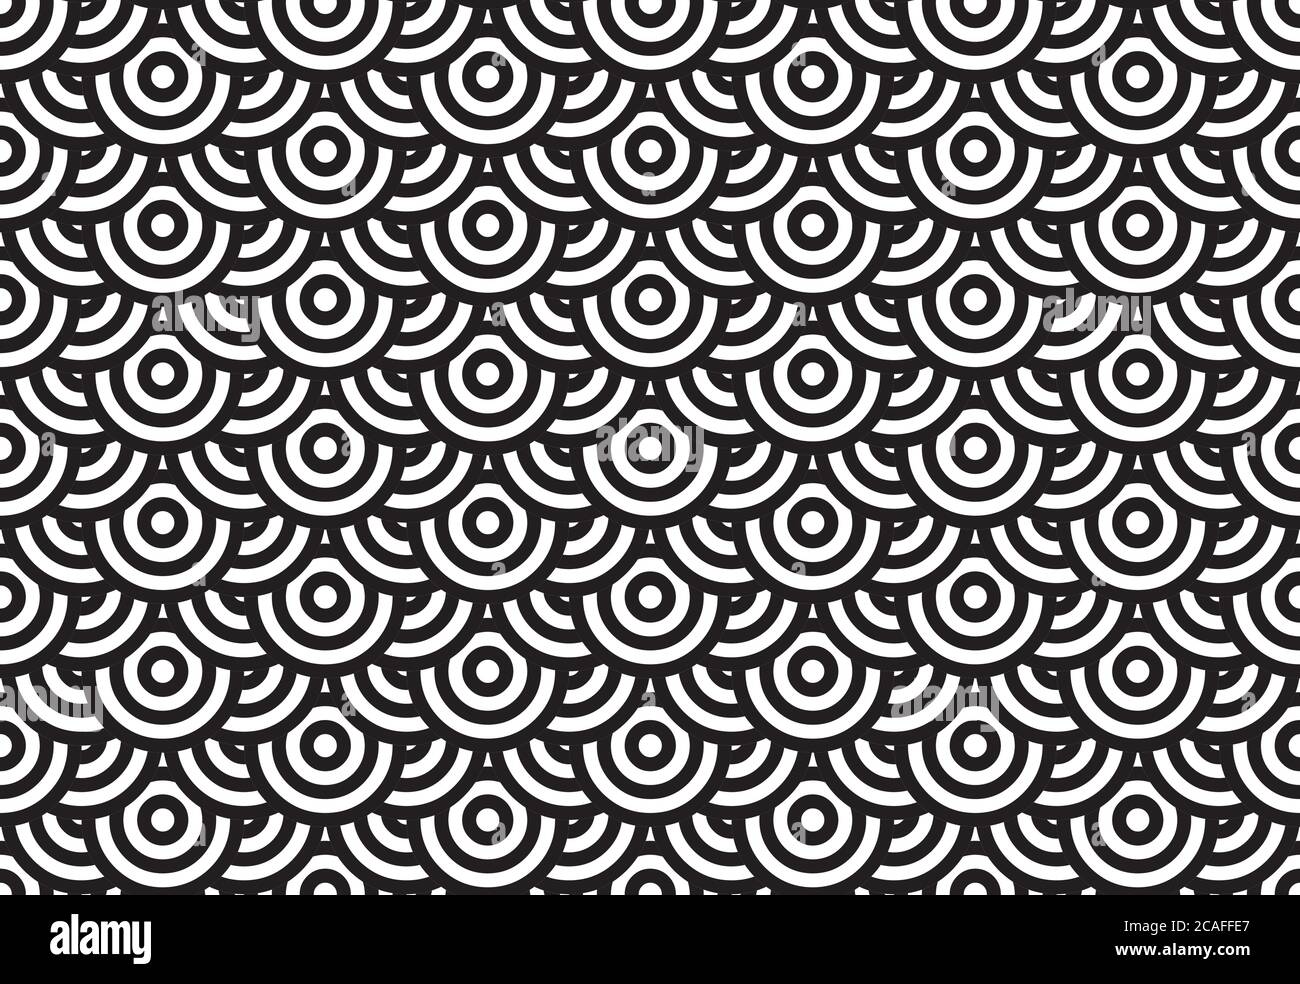 Overlapping concentric circles in a repeating black and white wave pattern, abstract vector illustration Stock Vector